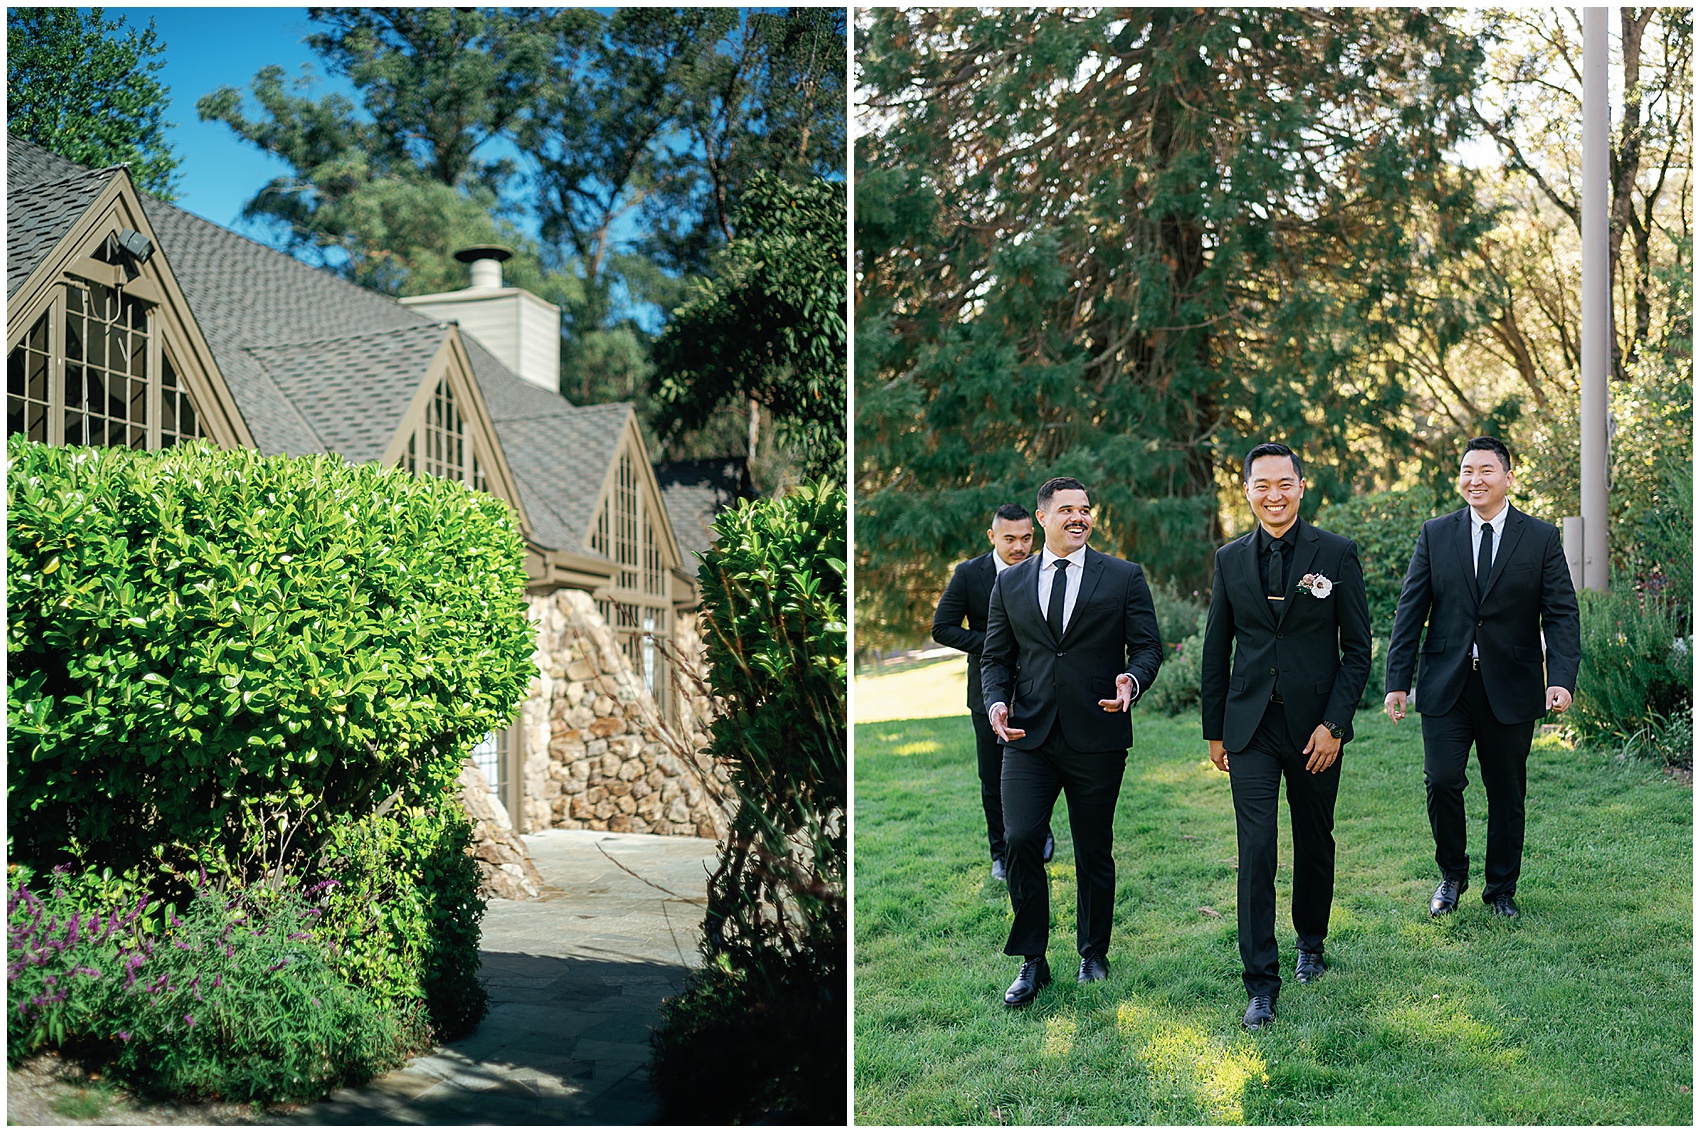 A groom walks through a garden lawn with his three groomsmen in matching black suits